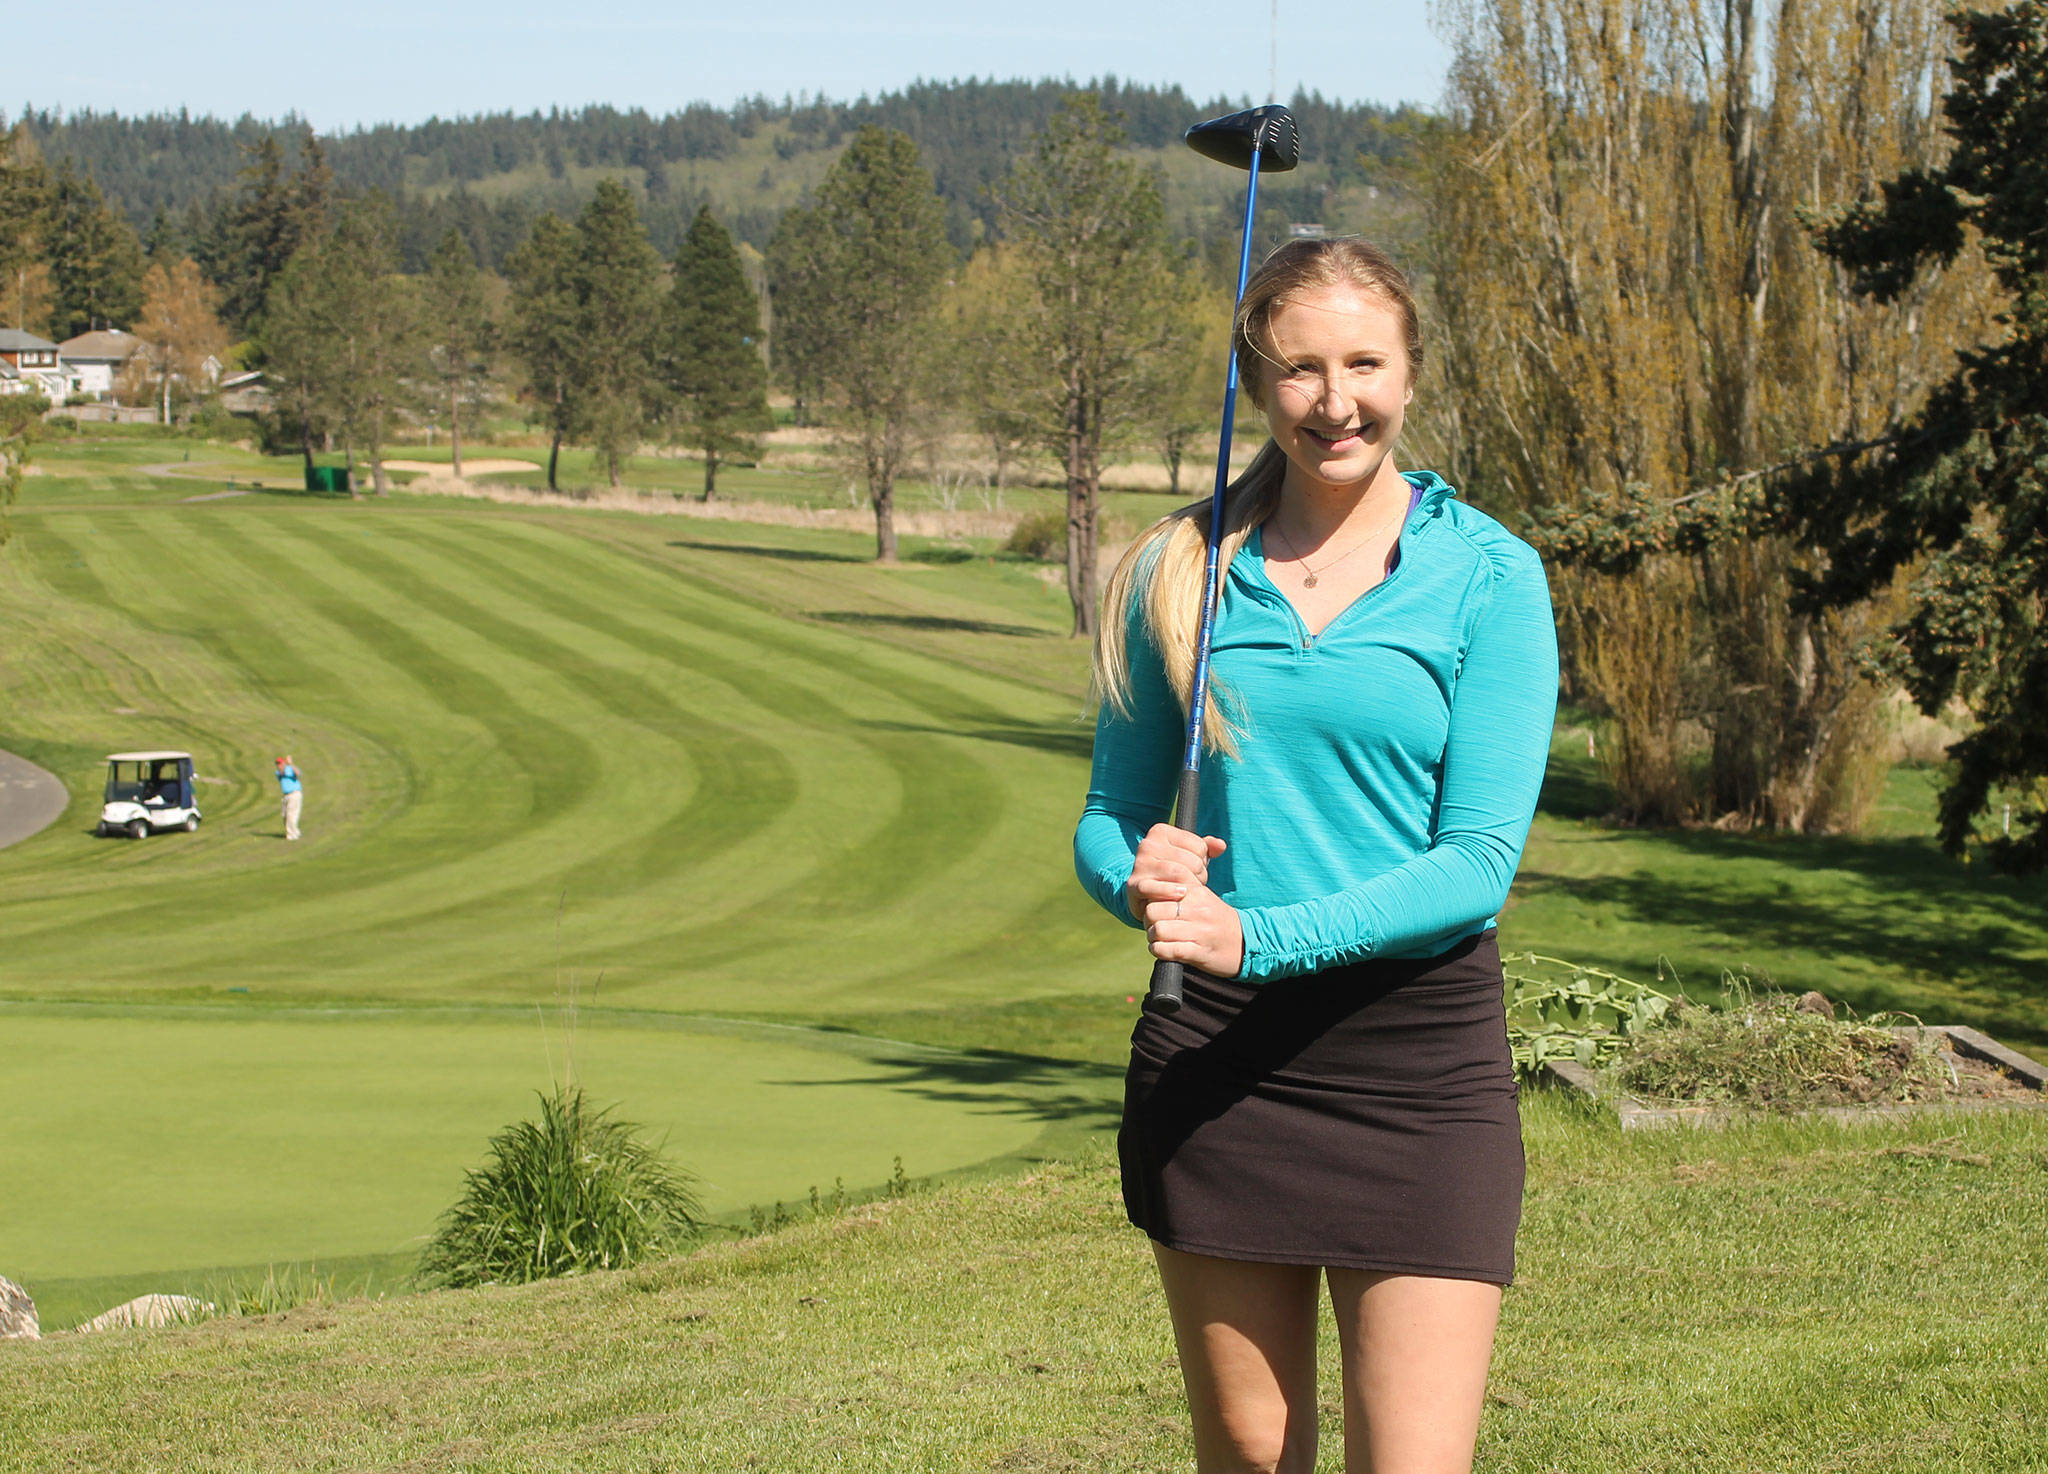 Kolby Heggenes, a South Whidbey High School senior, is leading a trio of highly talented golfers from the Langley school at the 1A/2B/1B girls golf championships at Hangman Valley Golf Course in Spokane. (South Whidbey Record file)